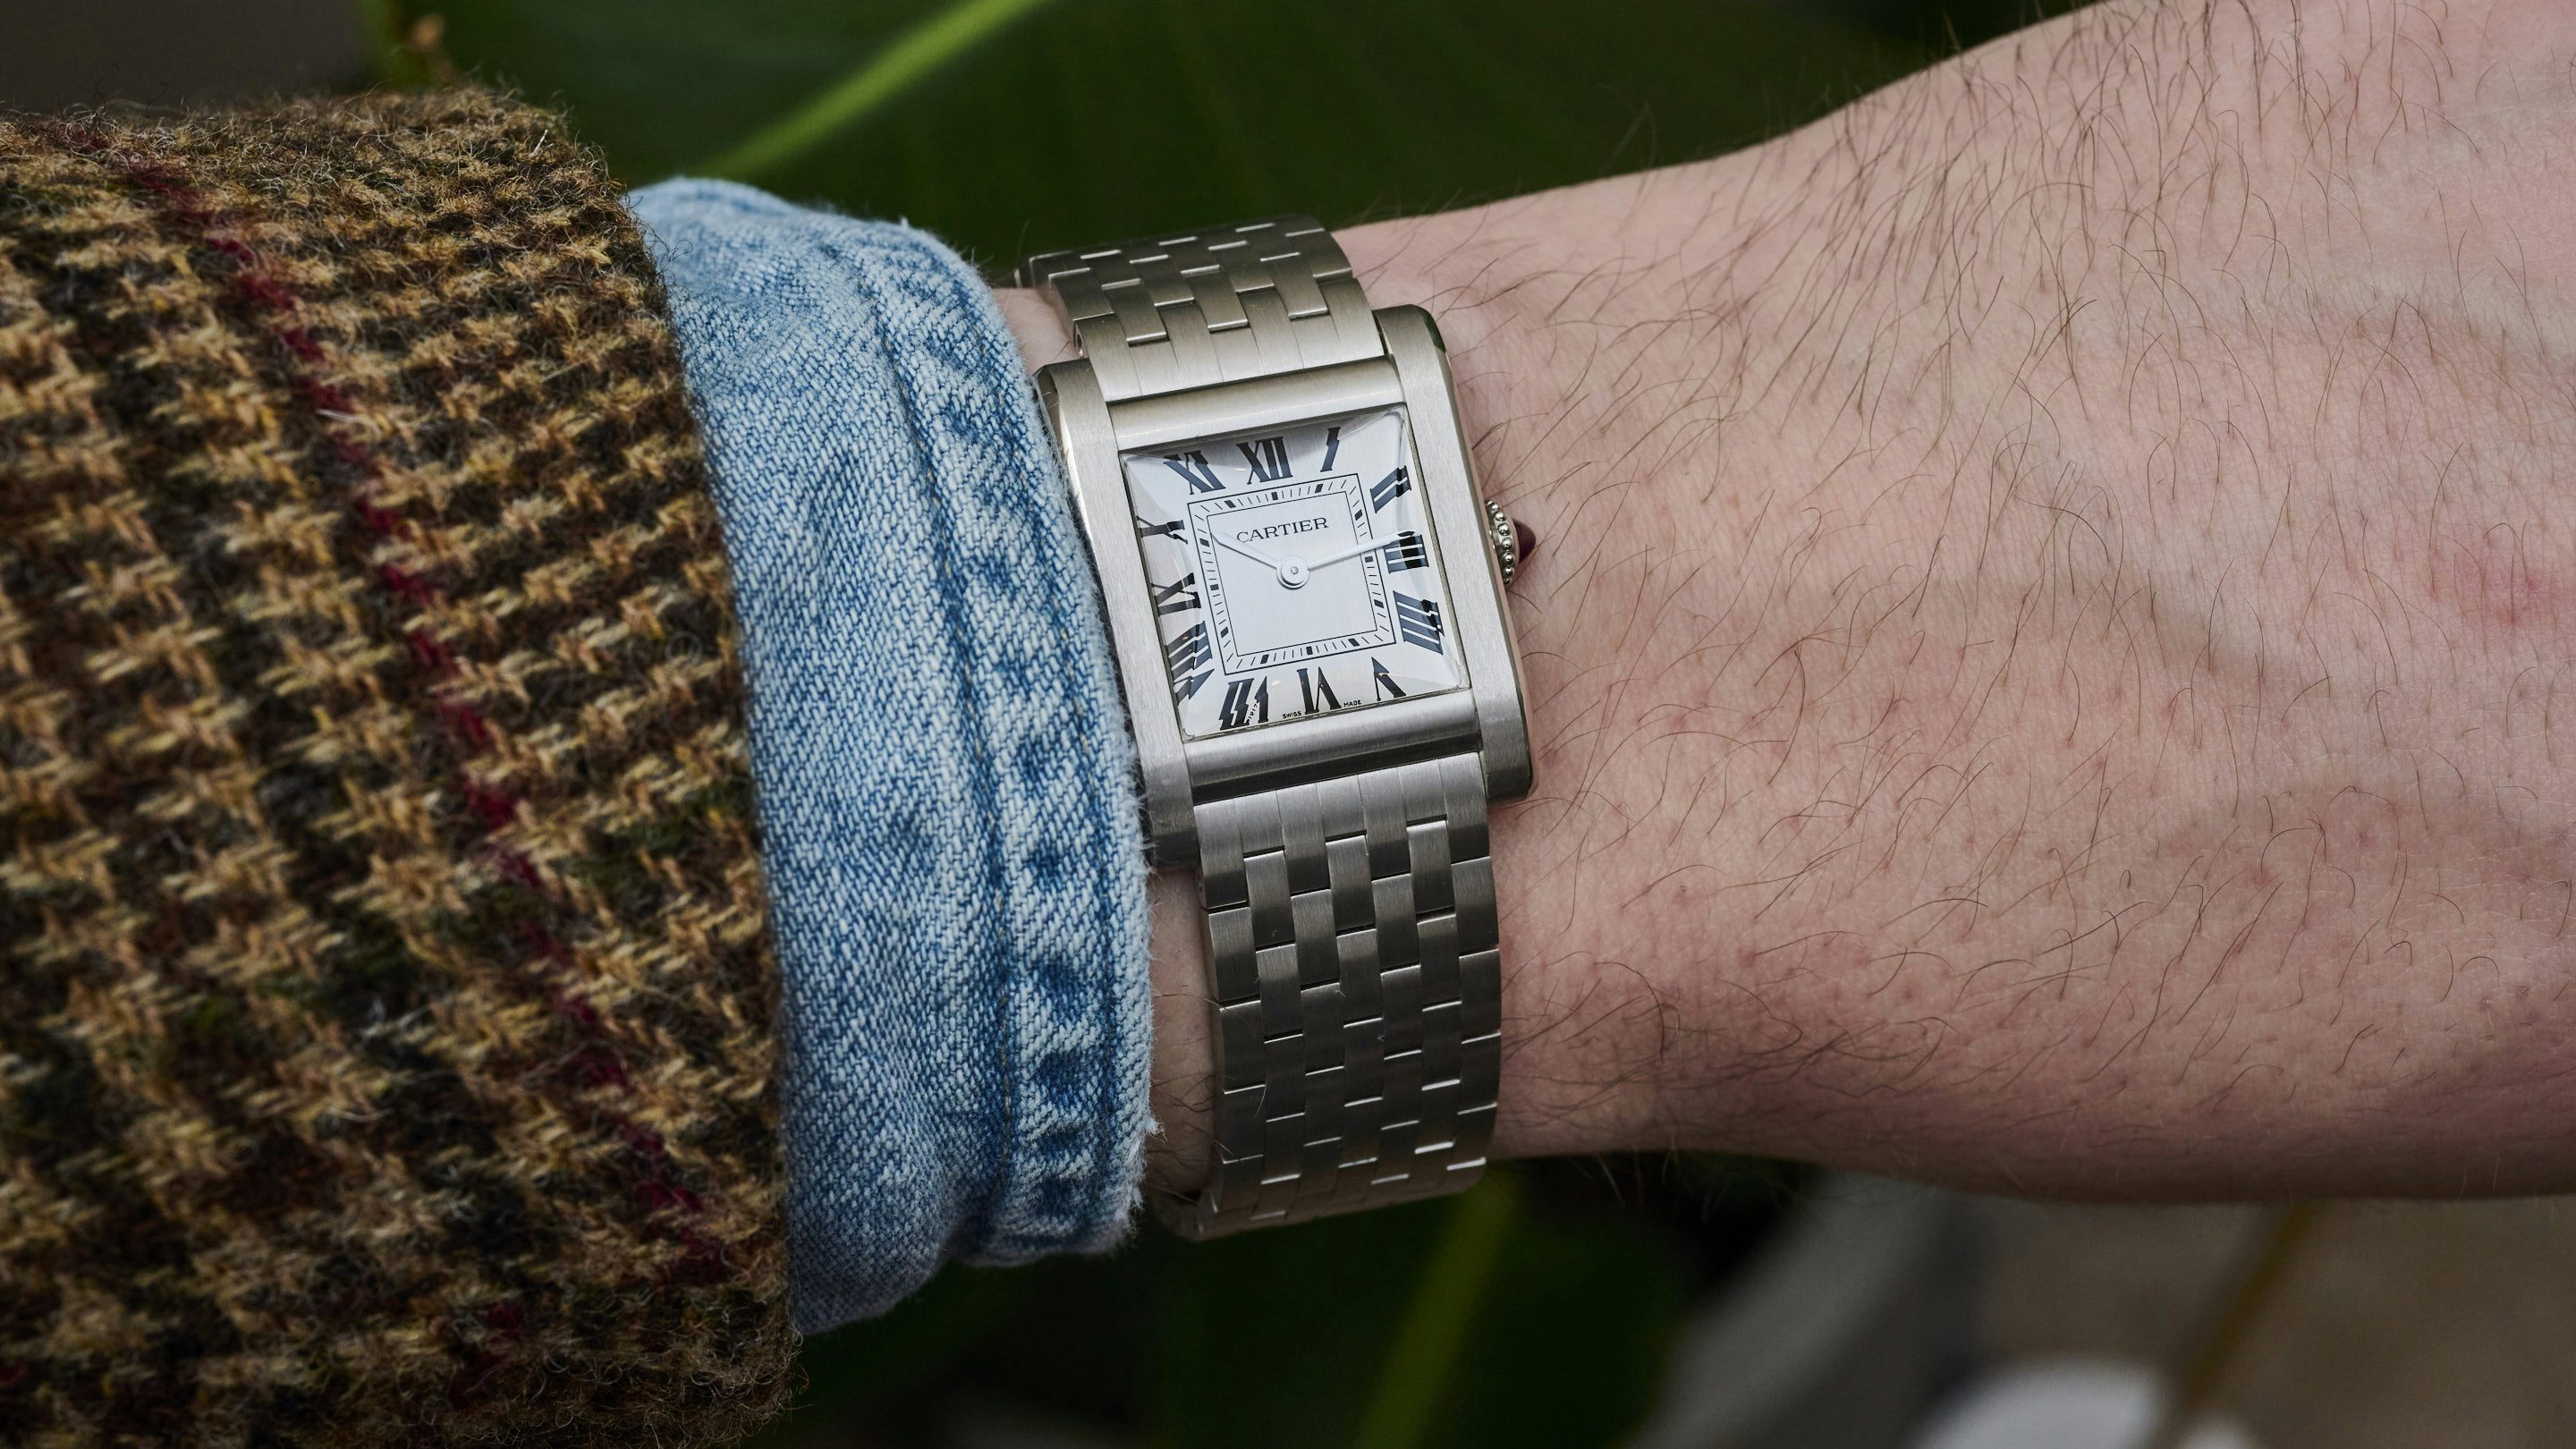 Hands-On: Cartier Privé Tank Normale Watch In Full Gold